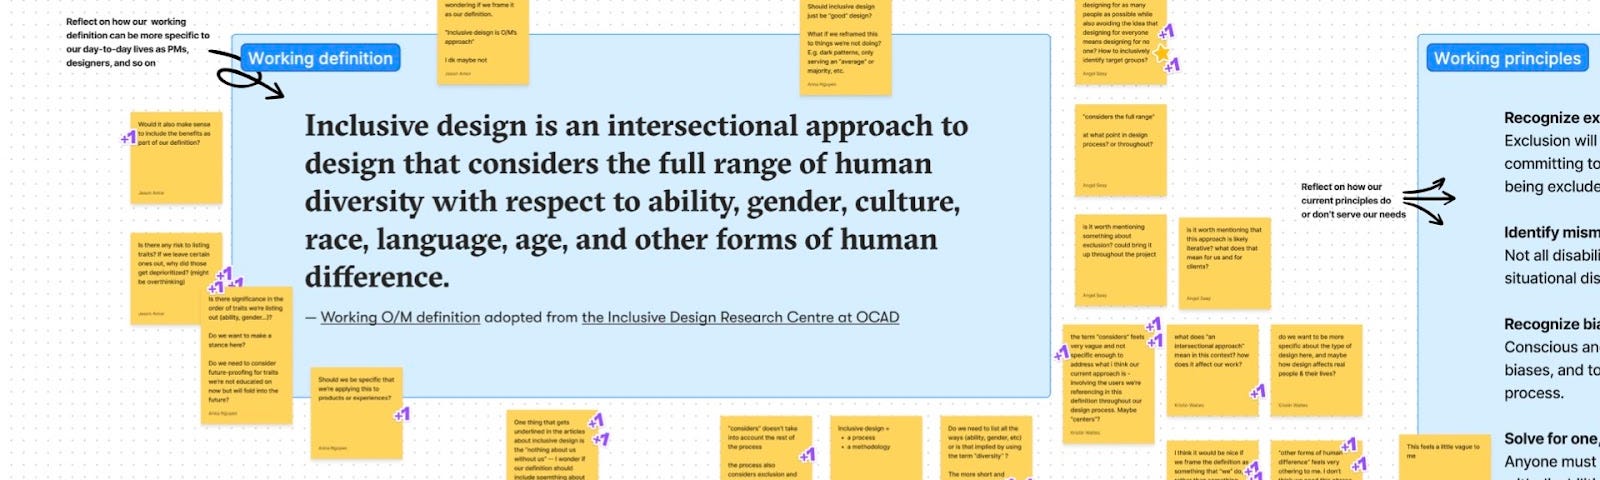 Screenshot filled with sticky notes, annotations, and various text related to inclusive design definitions and principles.